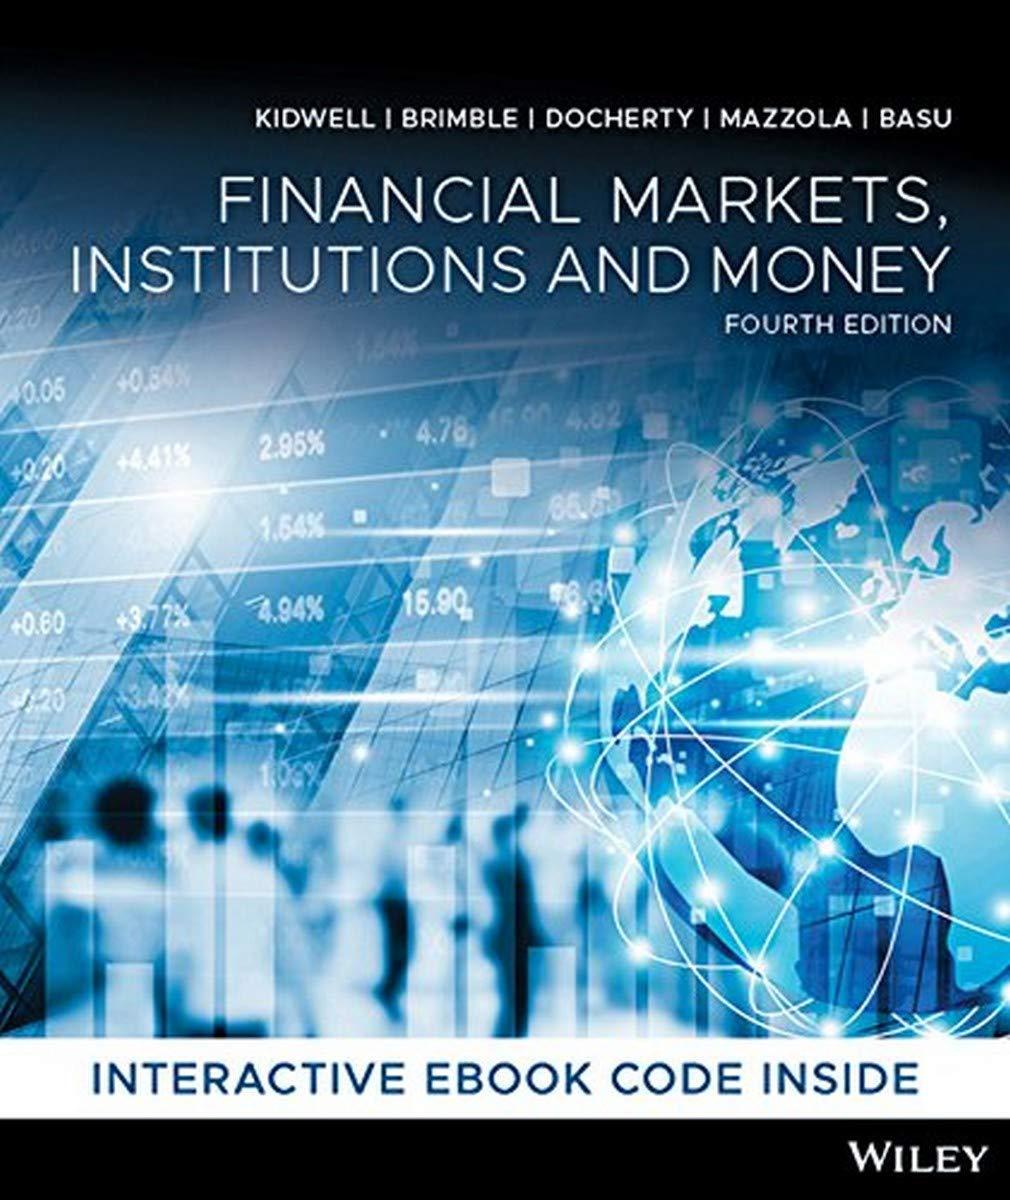 financial markets institutions and money 4th edition david s. kidwell 073036352x, 978-0730363521